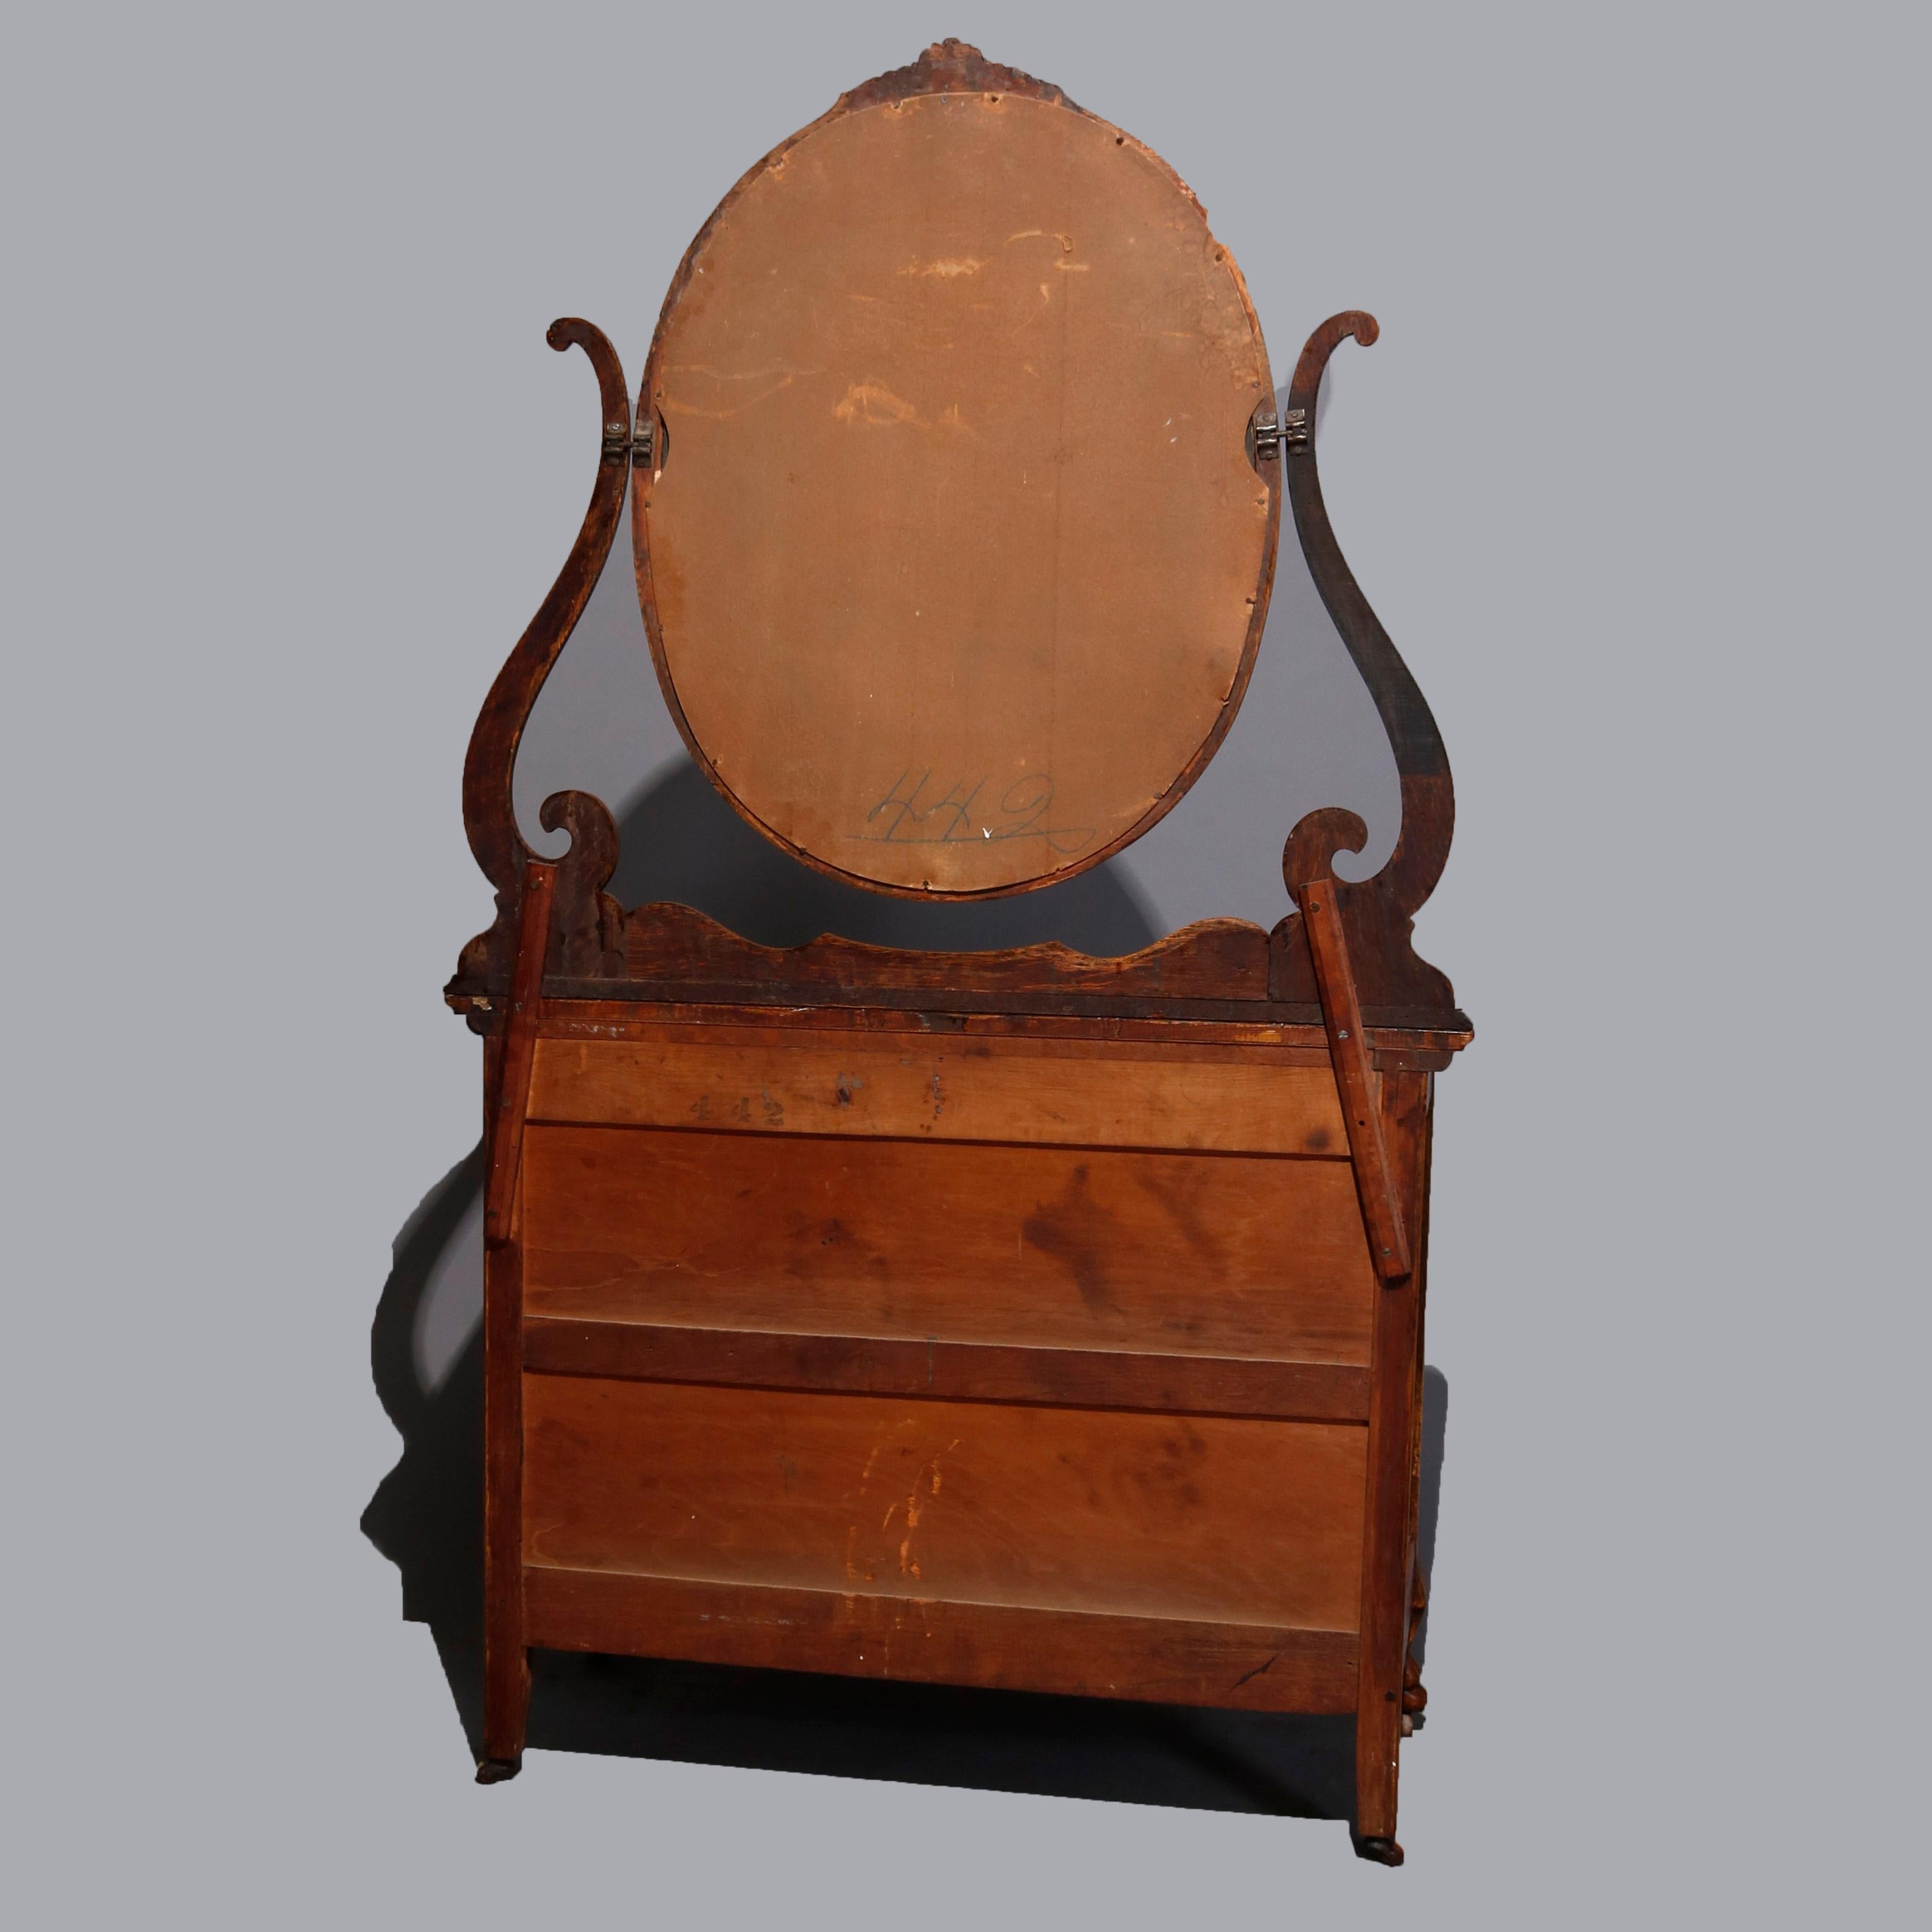 antique chest of drawers with mirror